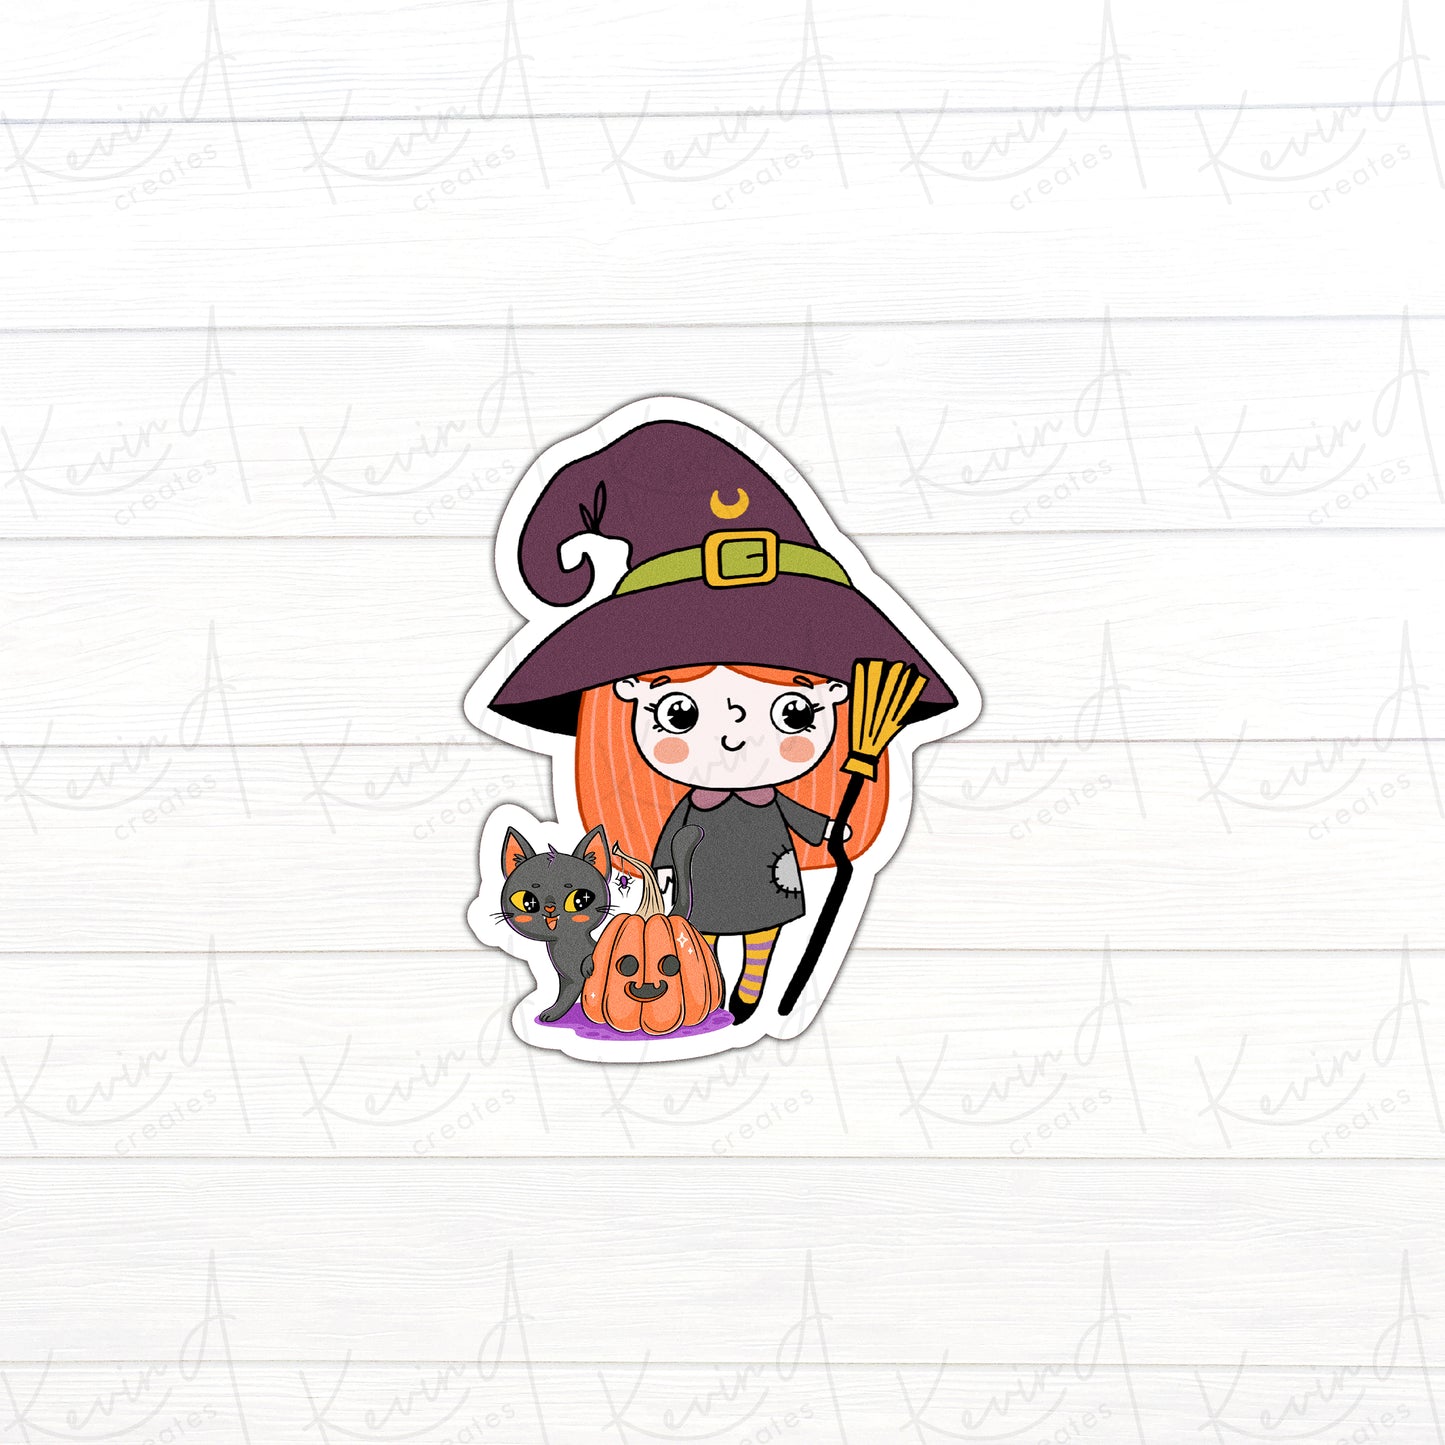 DC-062, "Witch and Spooky Kitty" Die Cut Stickers